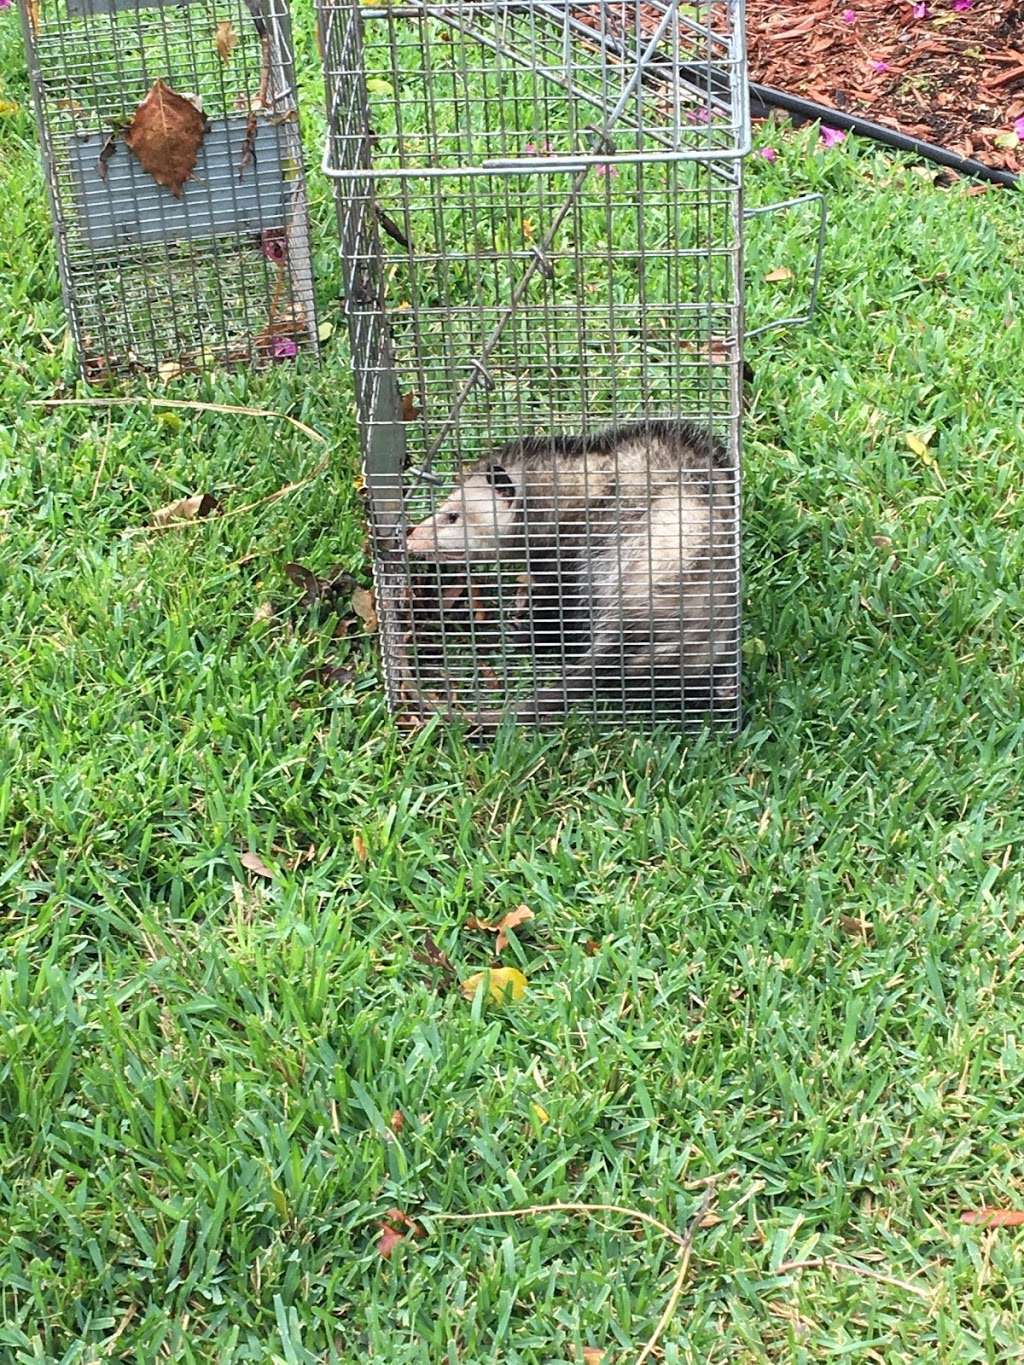 Critter Control of Fort Lauderdale | 4100 N Powerline Rd x1, Pompano Beach, FL 33073 | Phone: (954) 467-6067